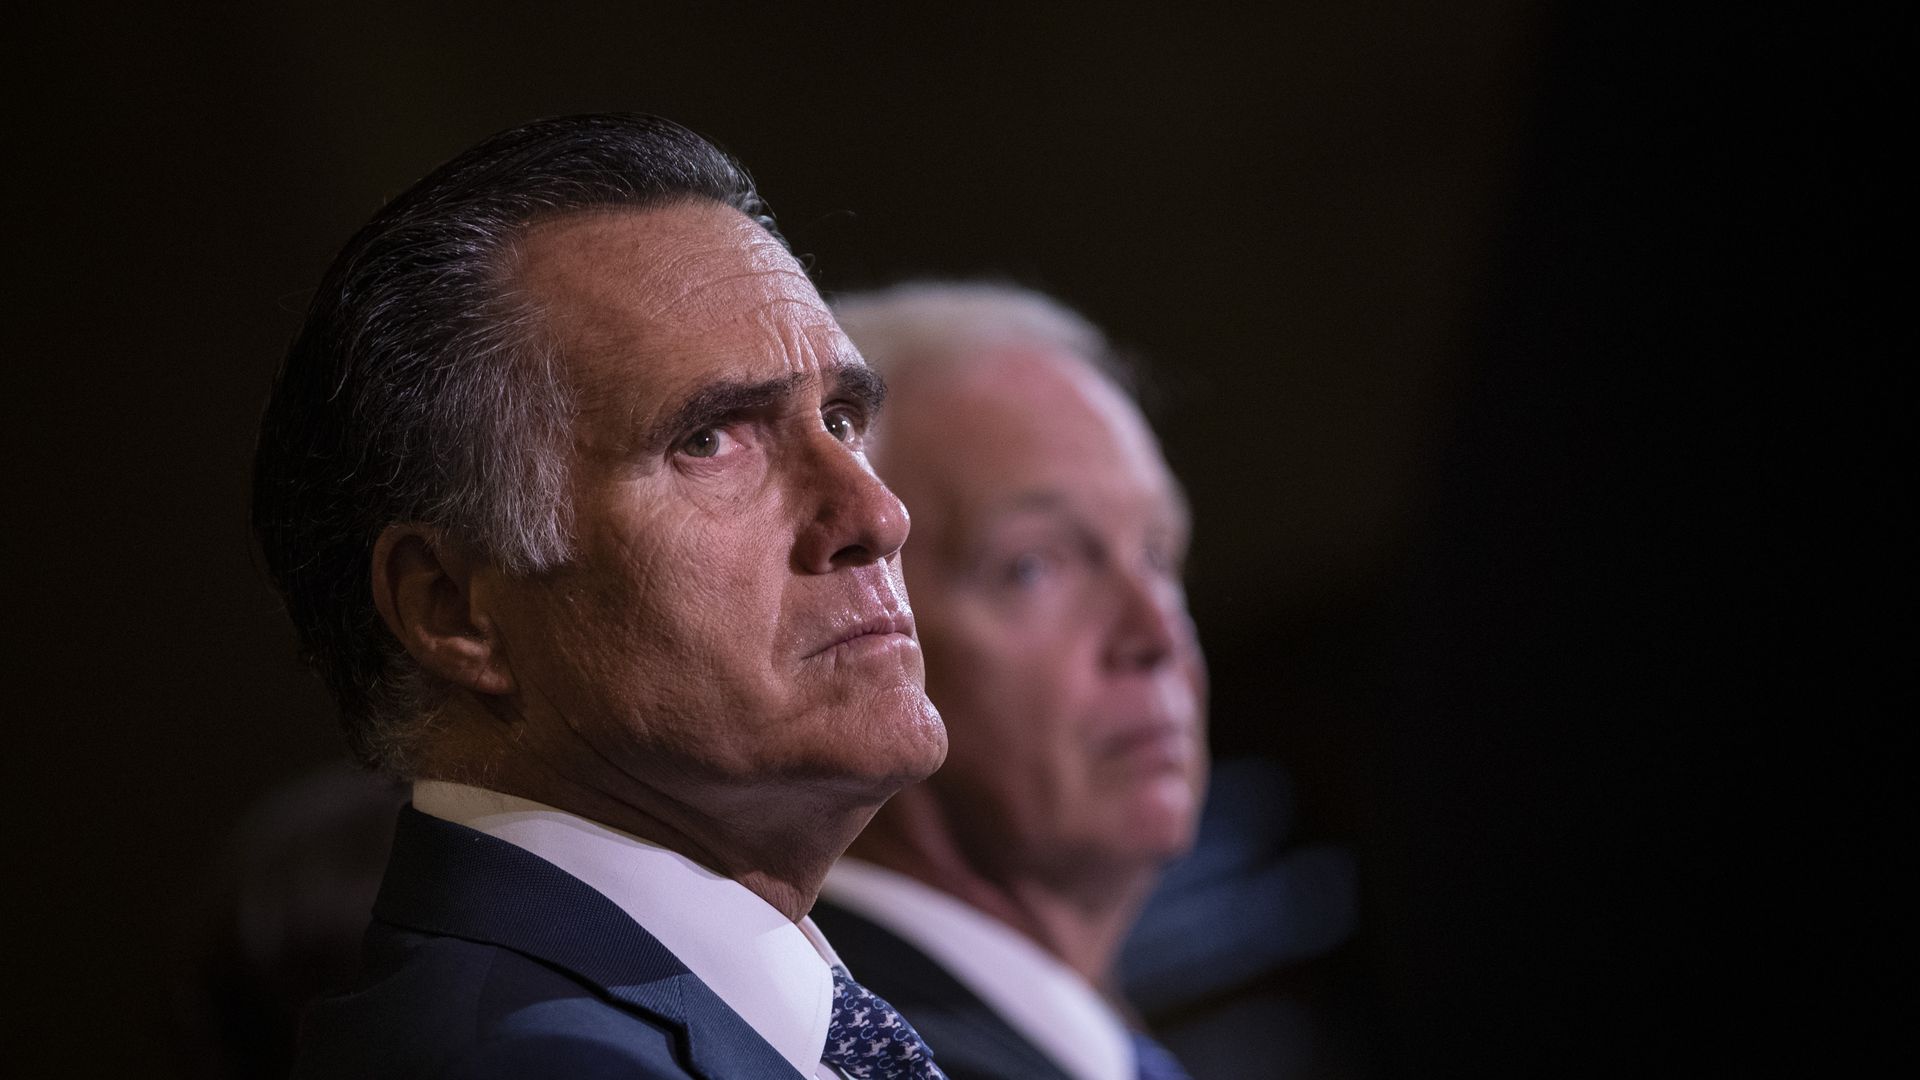 Mitt Romney condemns Trump-Ukraine allegations as "troubling in the extreme" - Axios